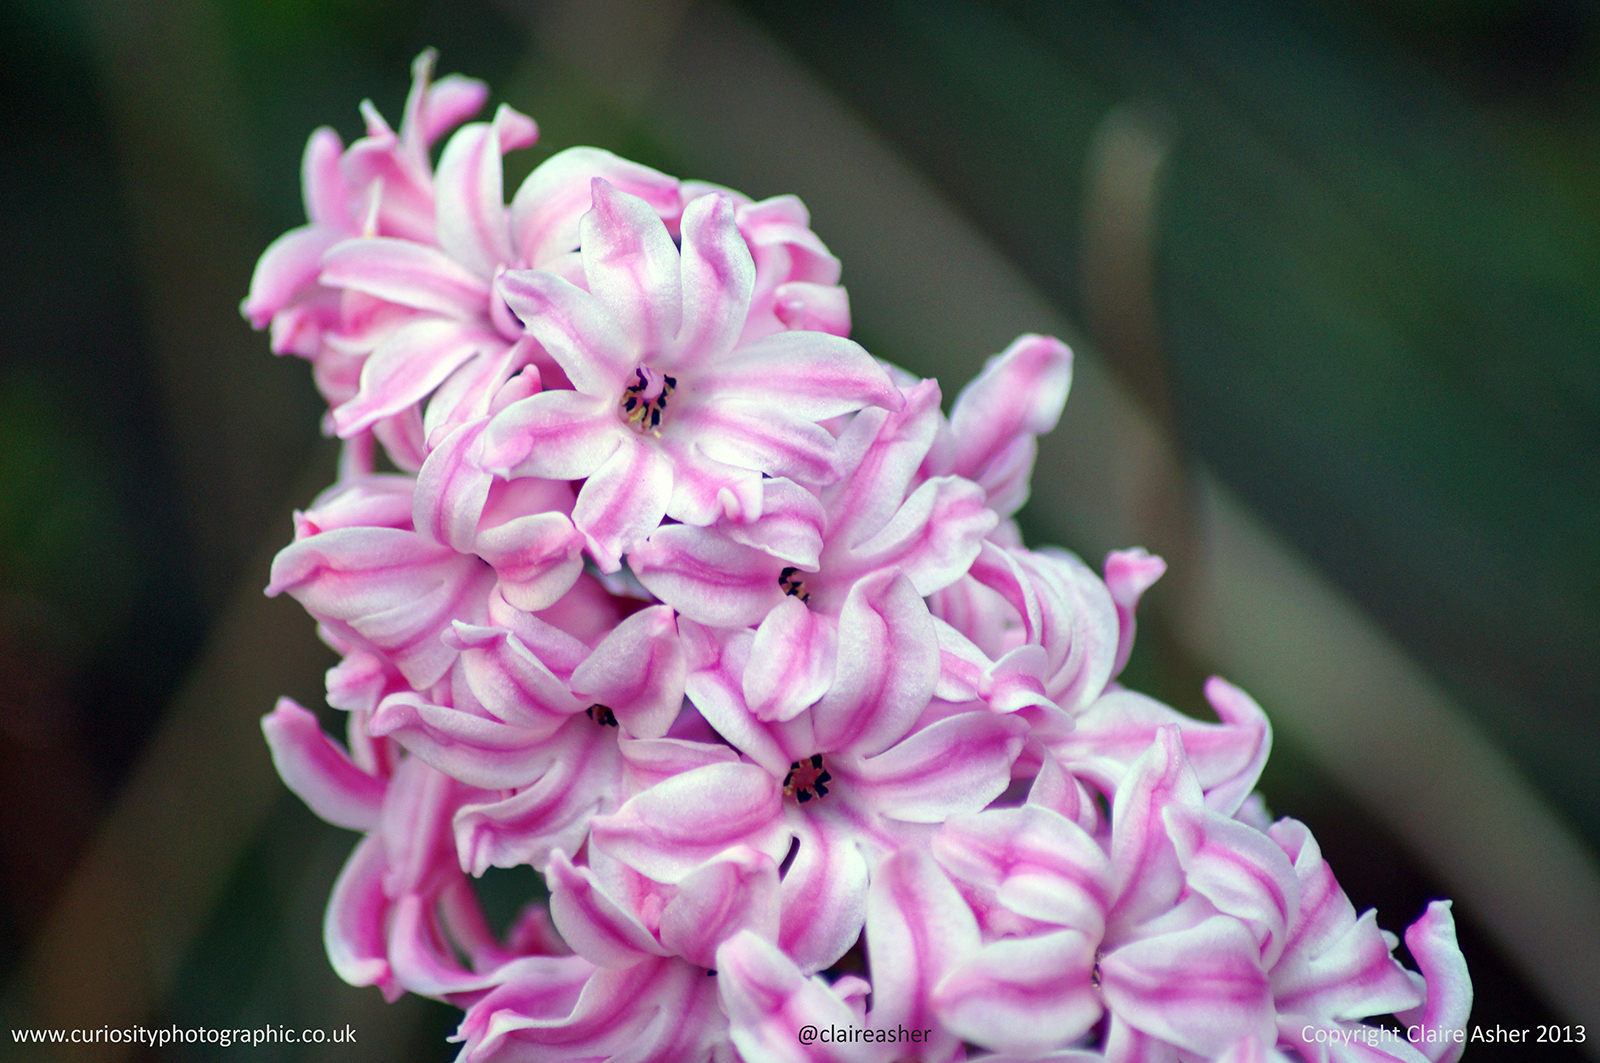 A pink Hyacinth (Hyacinthus orientalis) photographed in Hertfordshire, England in 2013